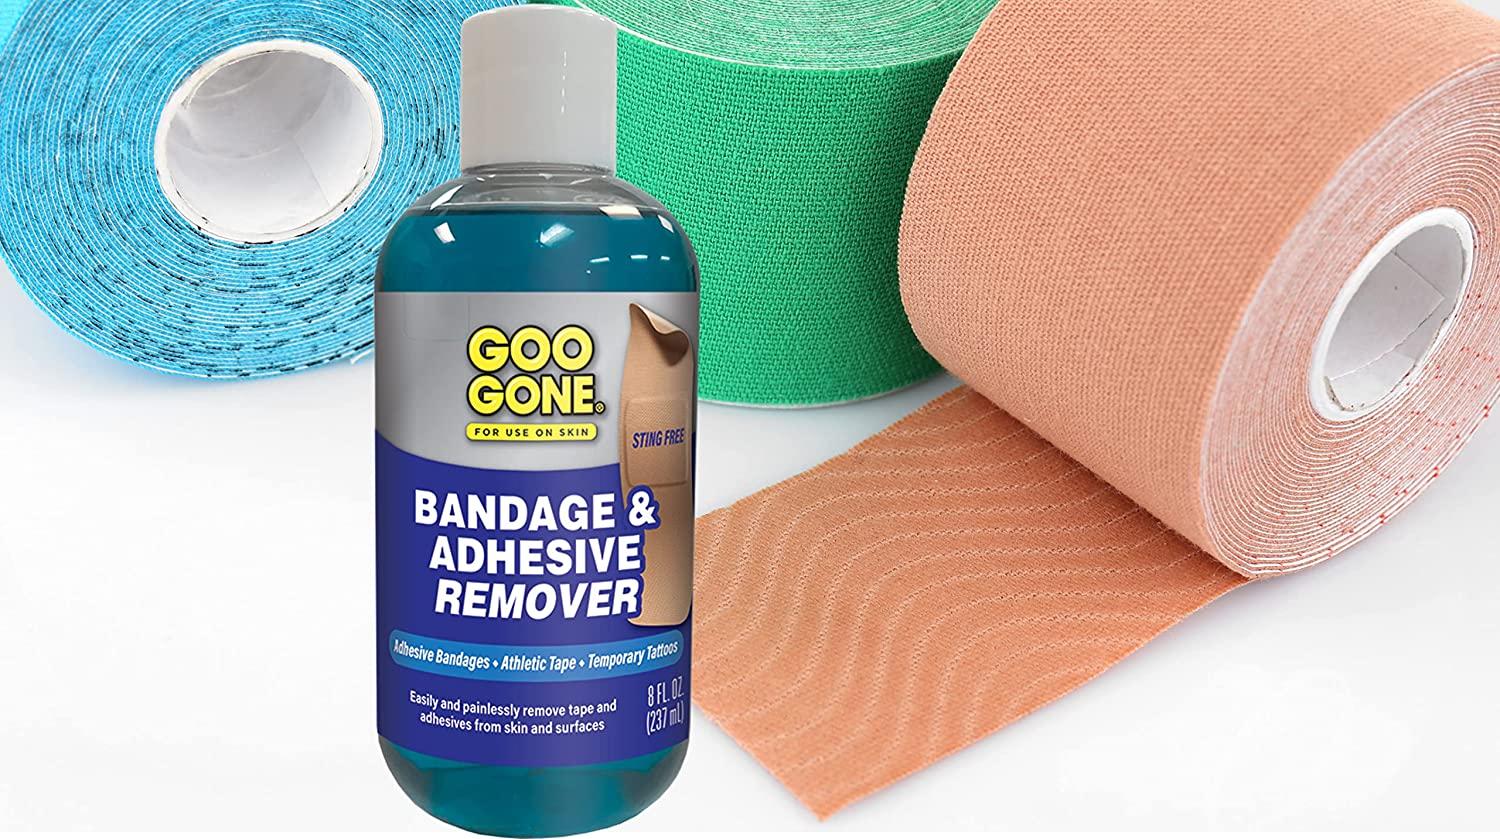 Goo Gone Bandage & Adhesive Remover - 8 Ounce (2 Pack) - Safe Method to  Remove Bandages and Adhesives